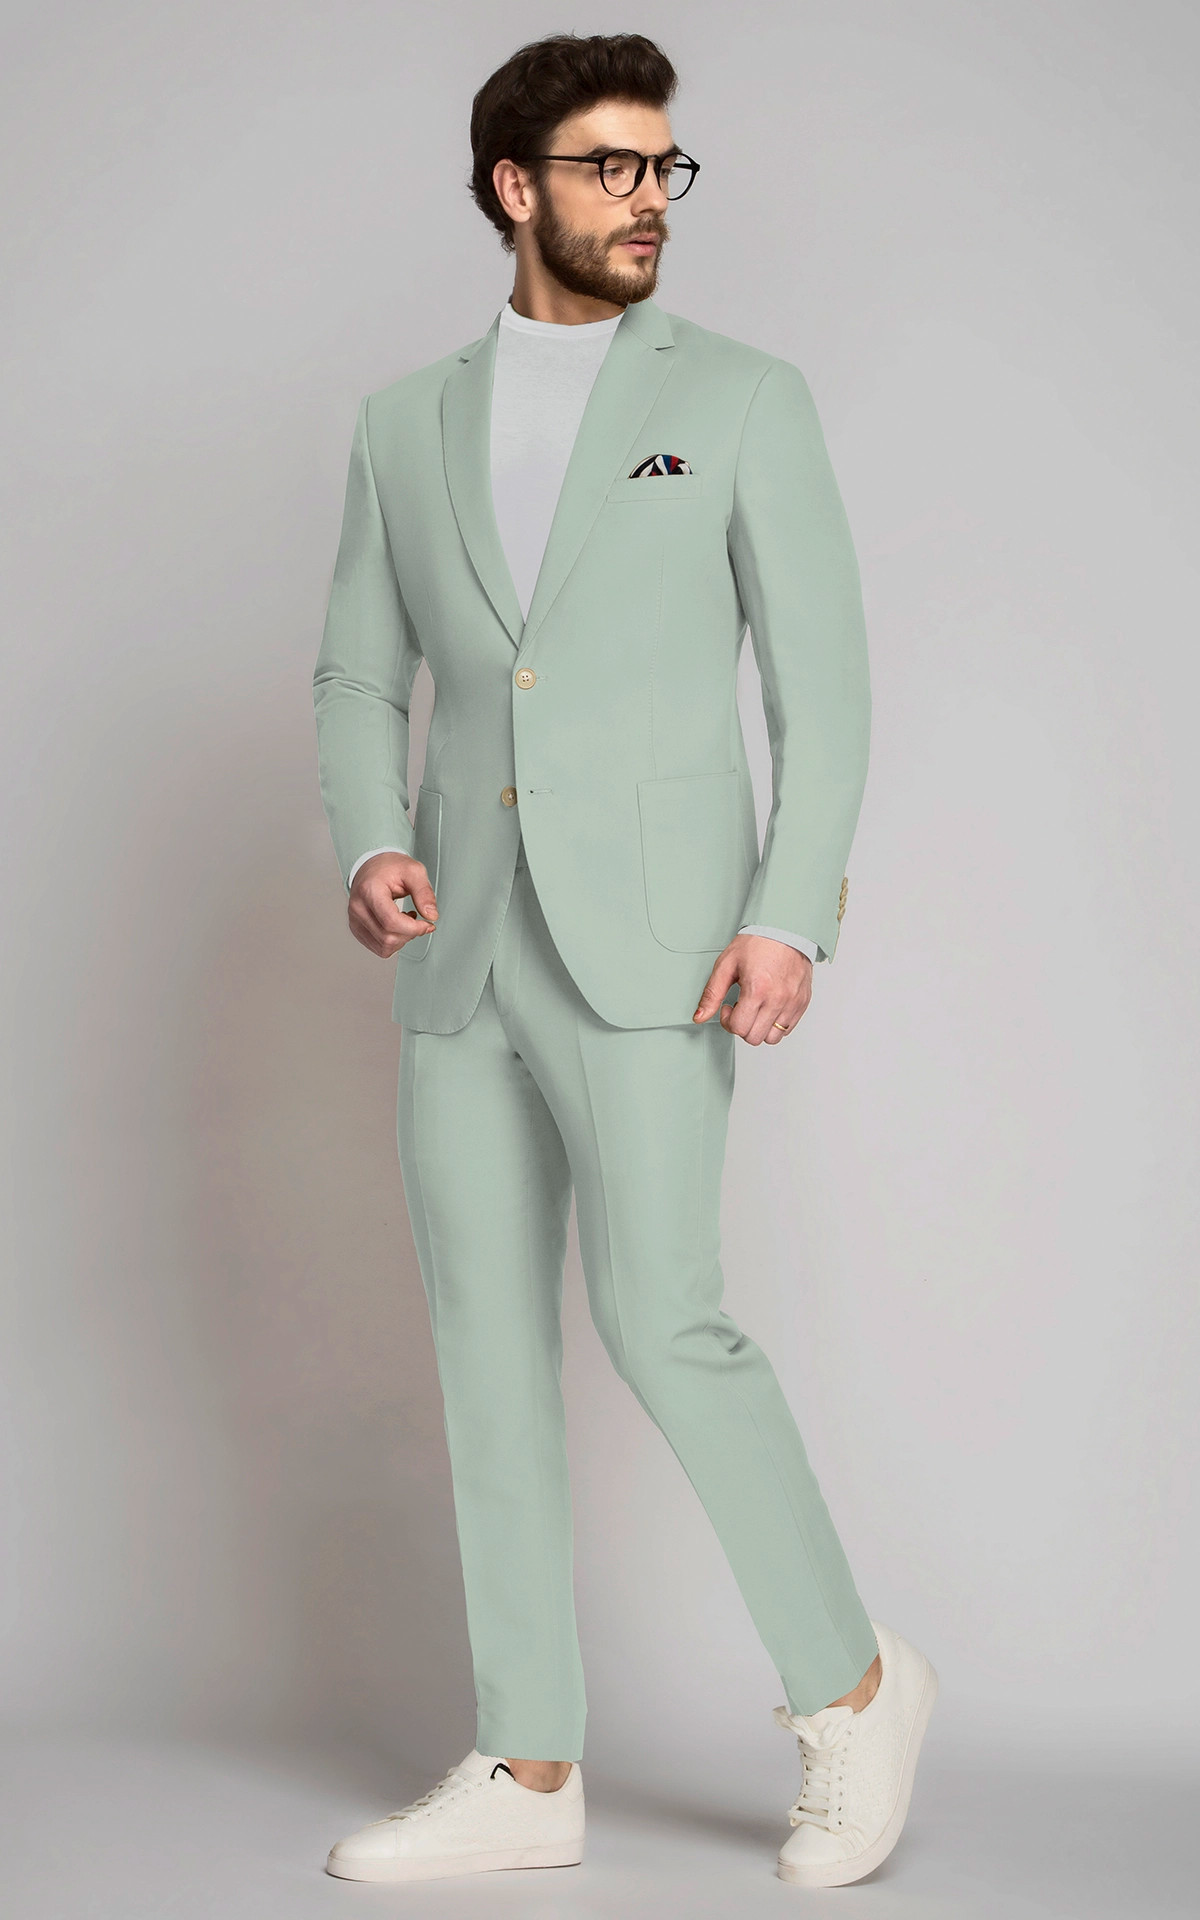 Mint Green Slim Fit Light Blue Suit Wedding With Peaked Lapel For Beach,  Groomsmen, Wedding, Formal Prom Pan270O From Huhu6, $103 | DHgate.Com